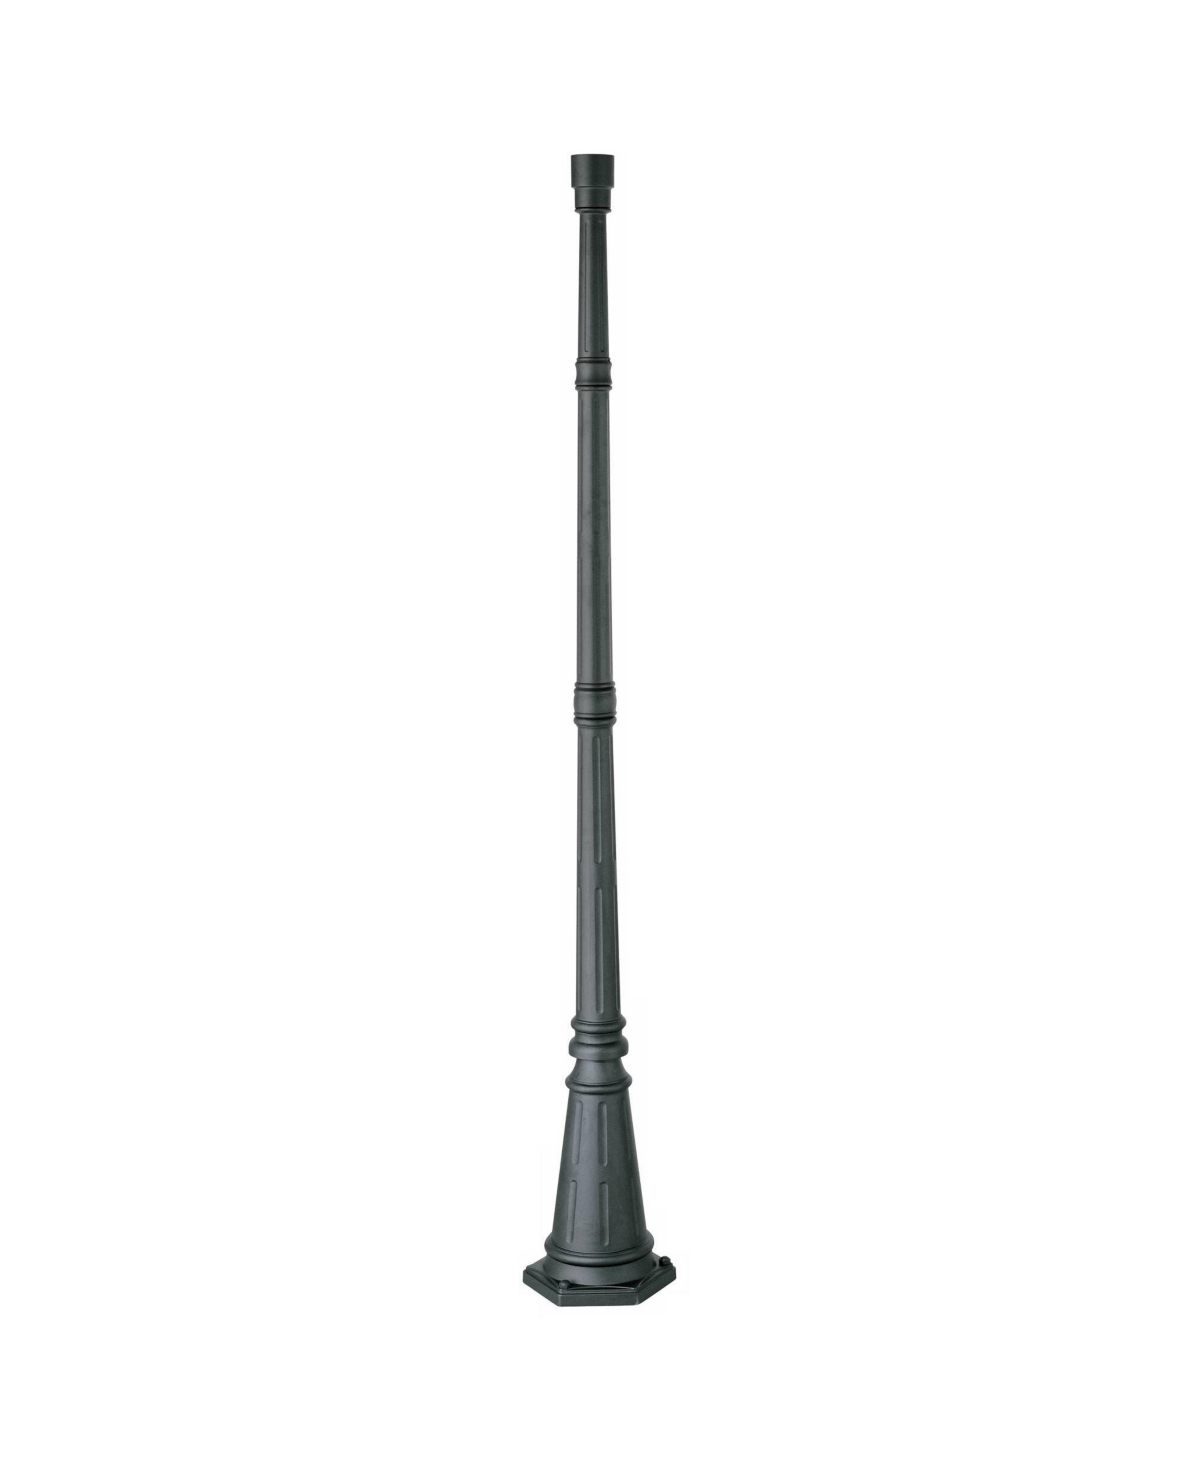 Hepworth Traditional Outdoor Light Post and Cap Base Black Iron Aluminum Pole 76 3/4" Accessory for Exterior House Porch Patio Garage Yard Garden Driv